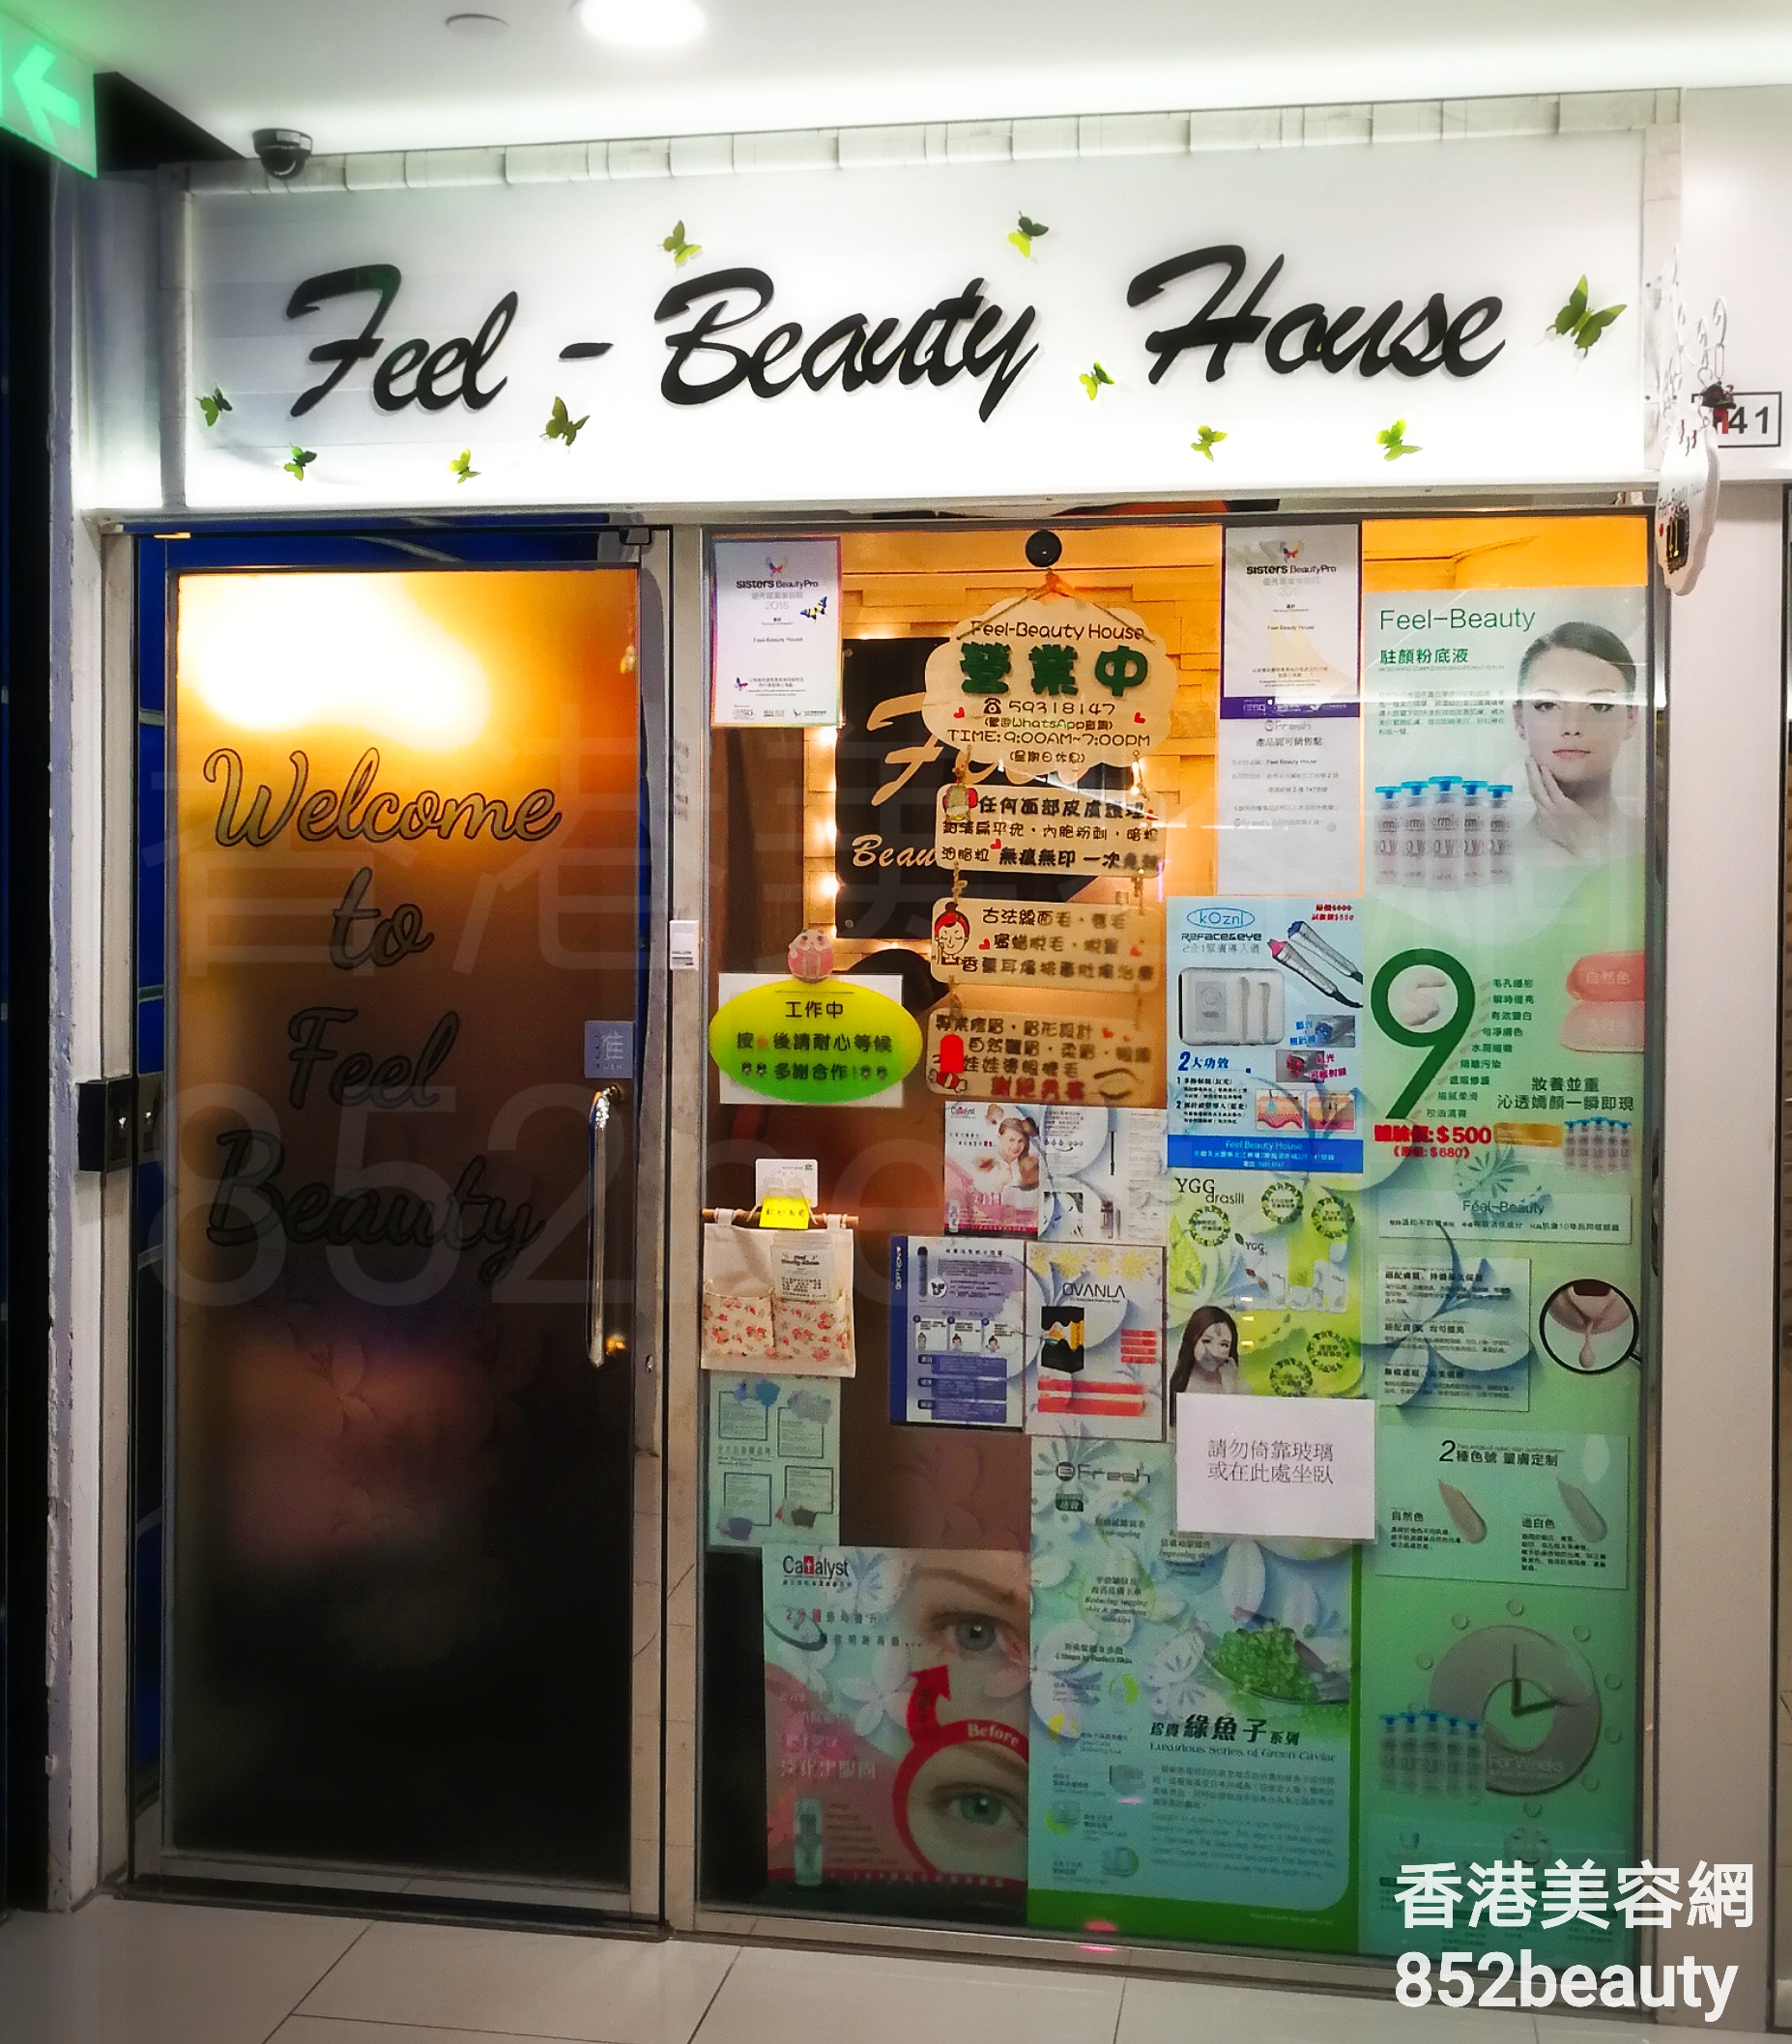 Hand and foot care: Feel-Beauty House